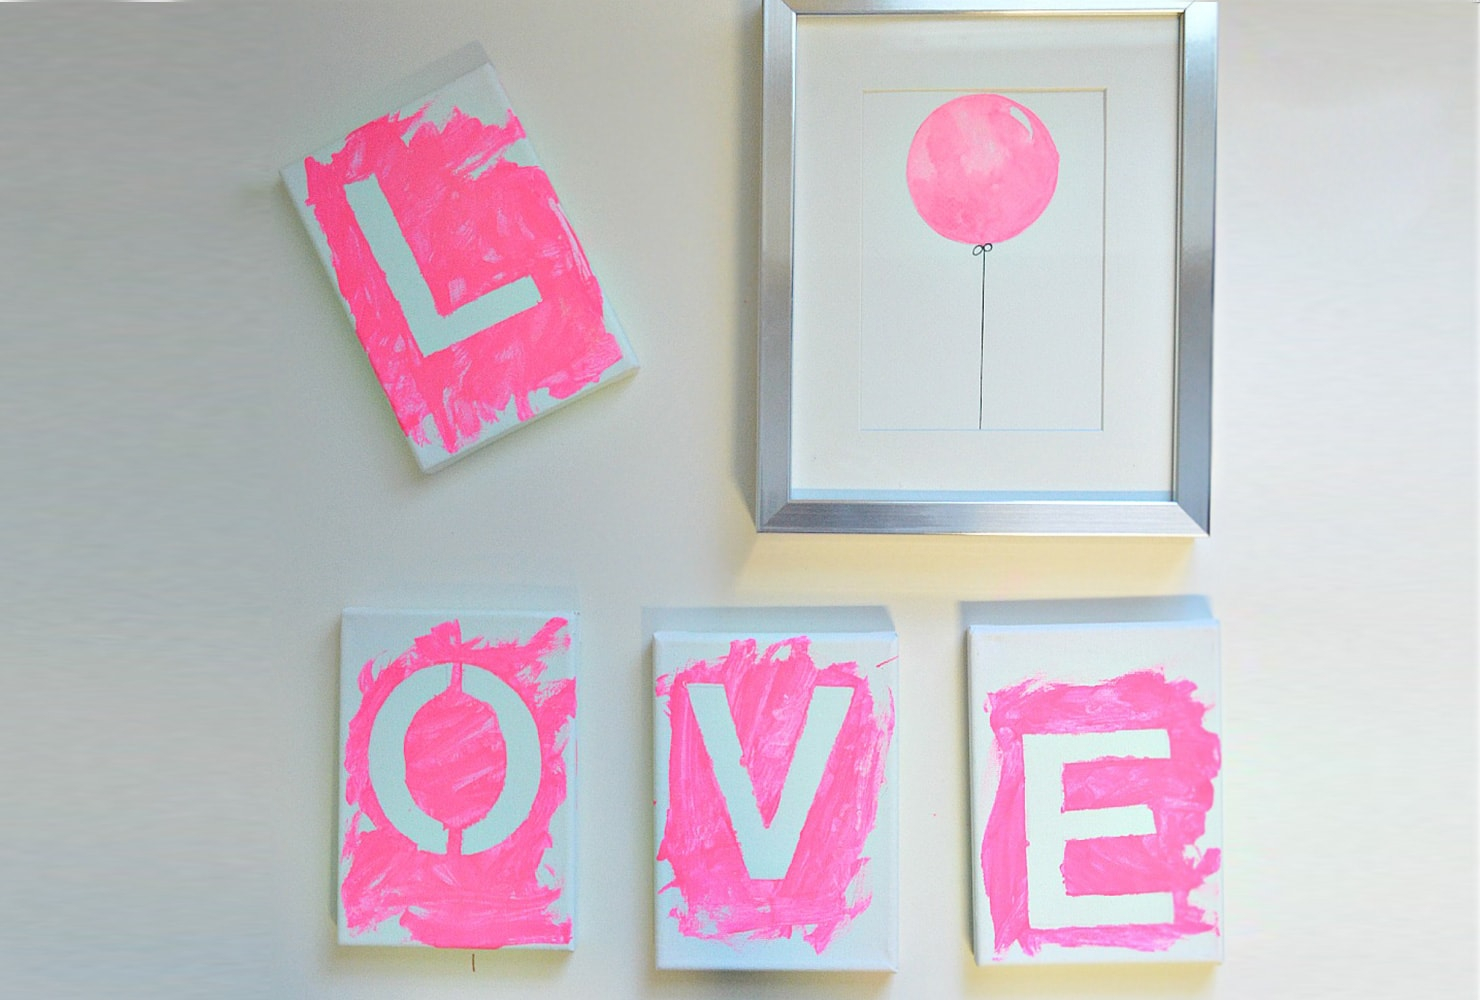 Kid-friendly love art Trouble-Free DIY Canvas Wall Art Ideas To Decorate Your Home